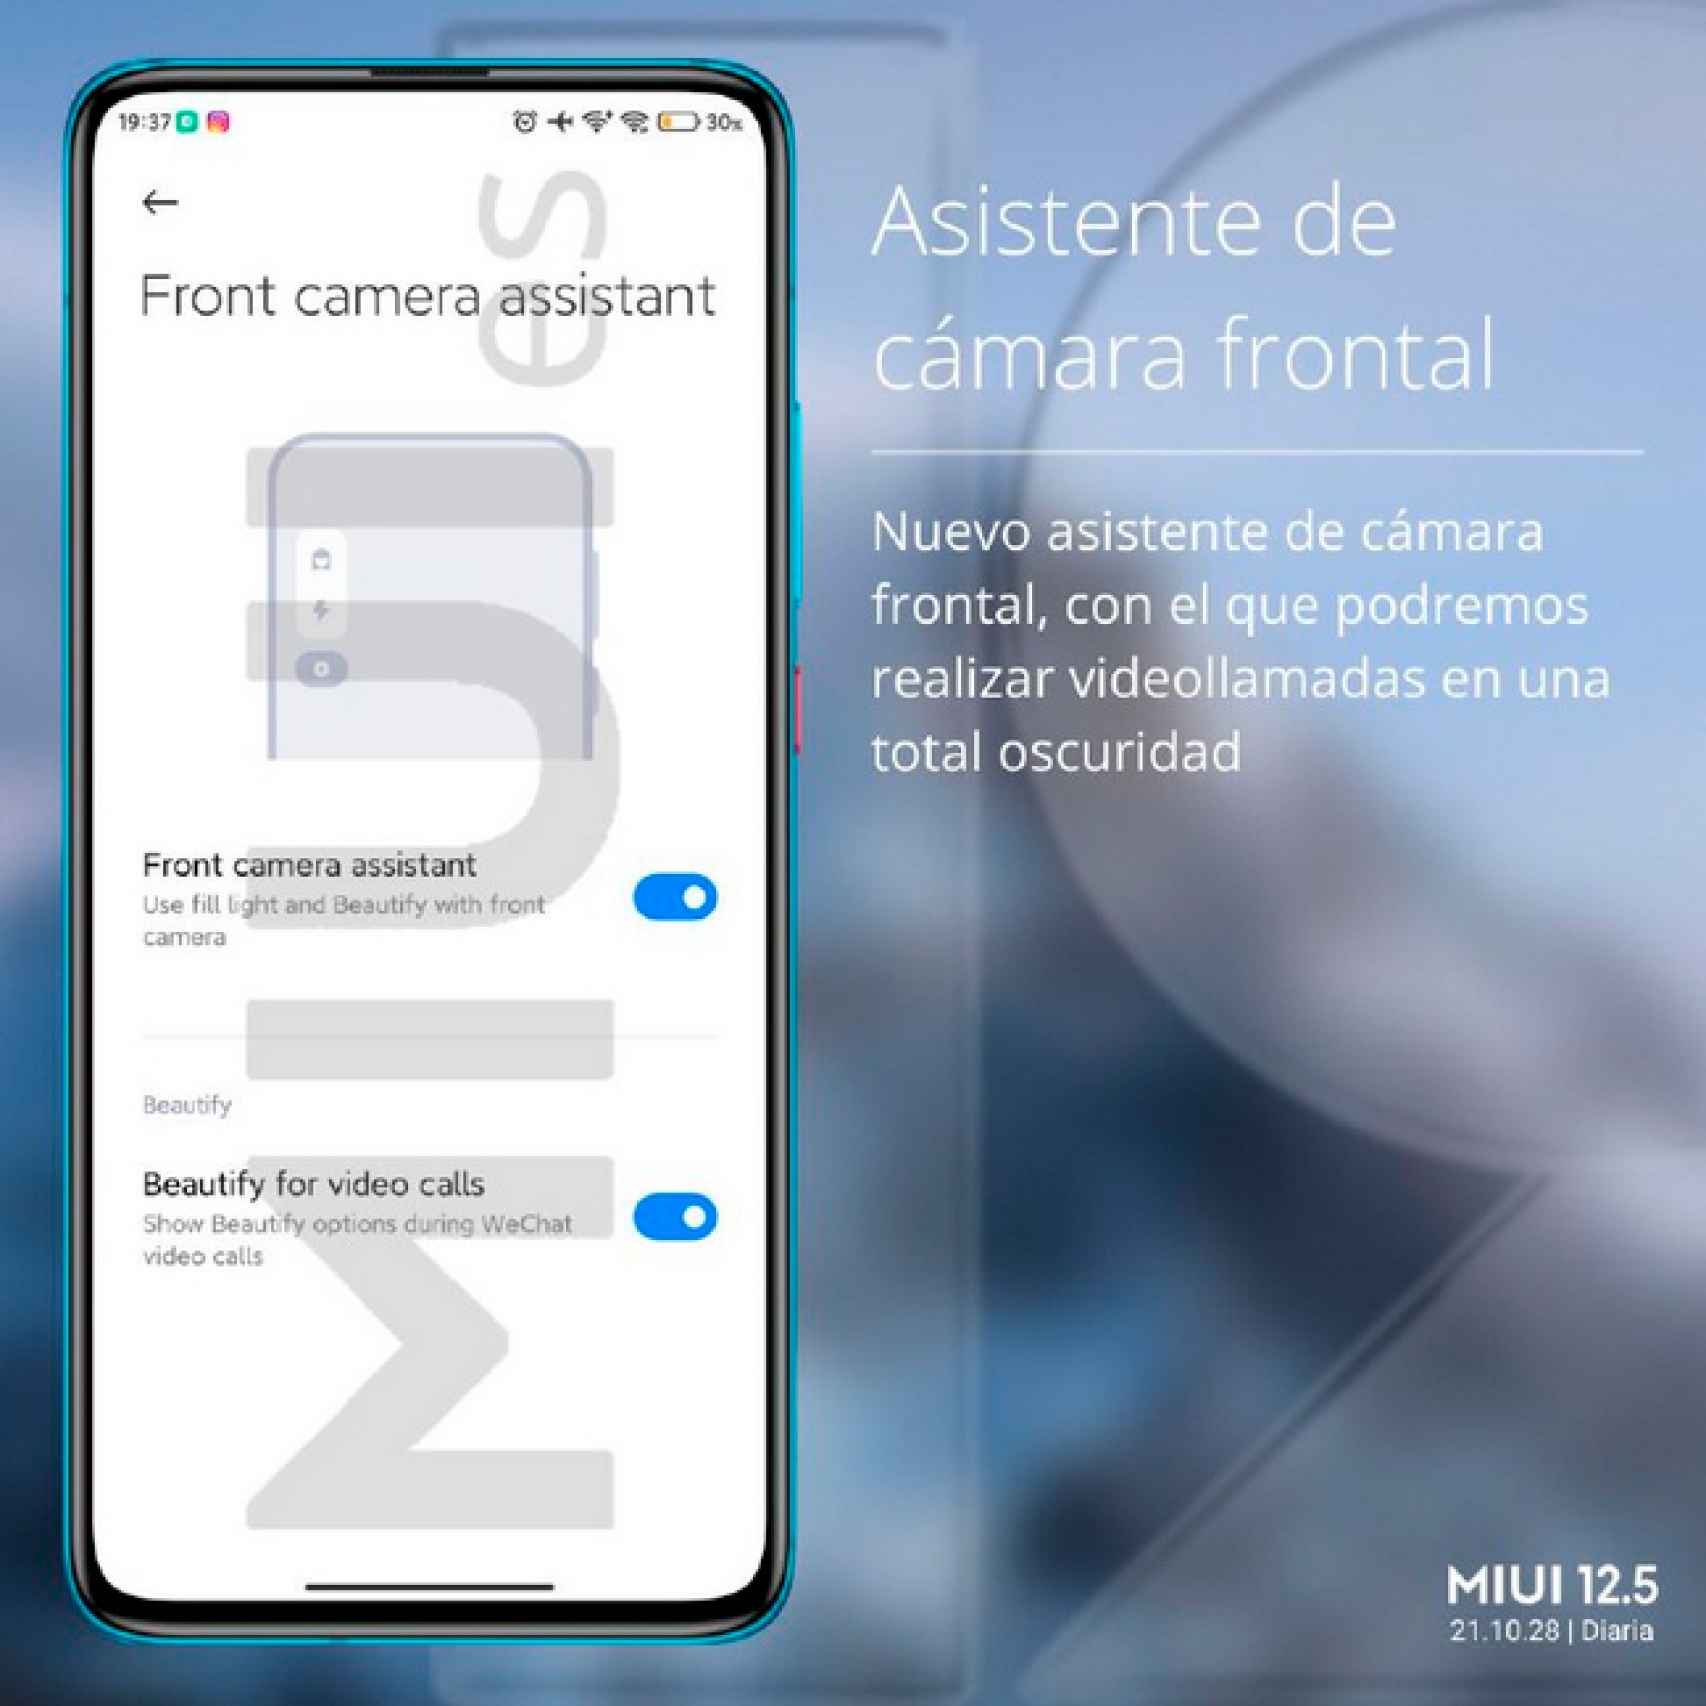 Front camera assistant in MIUI 12.5